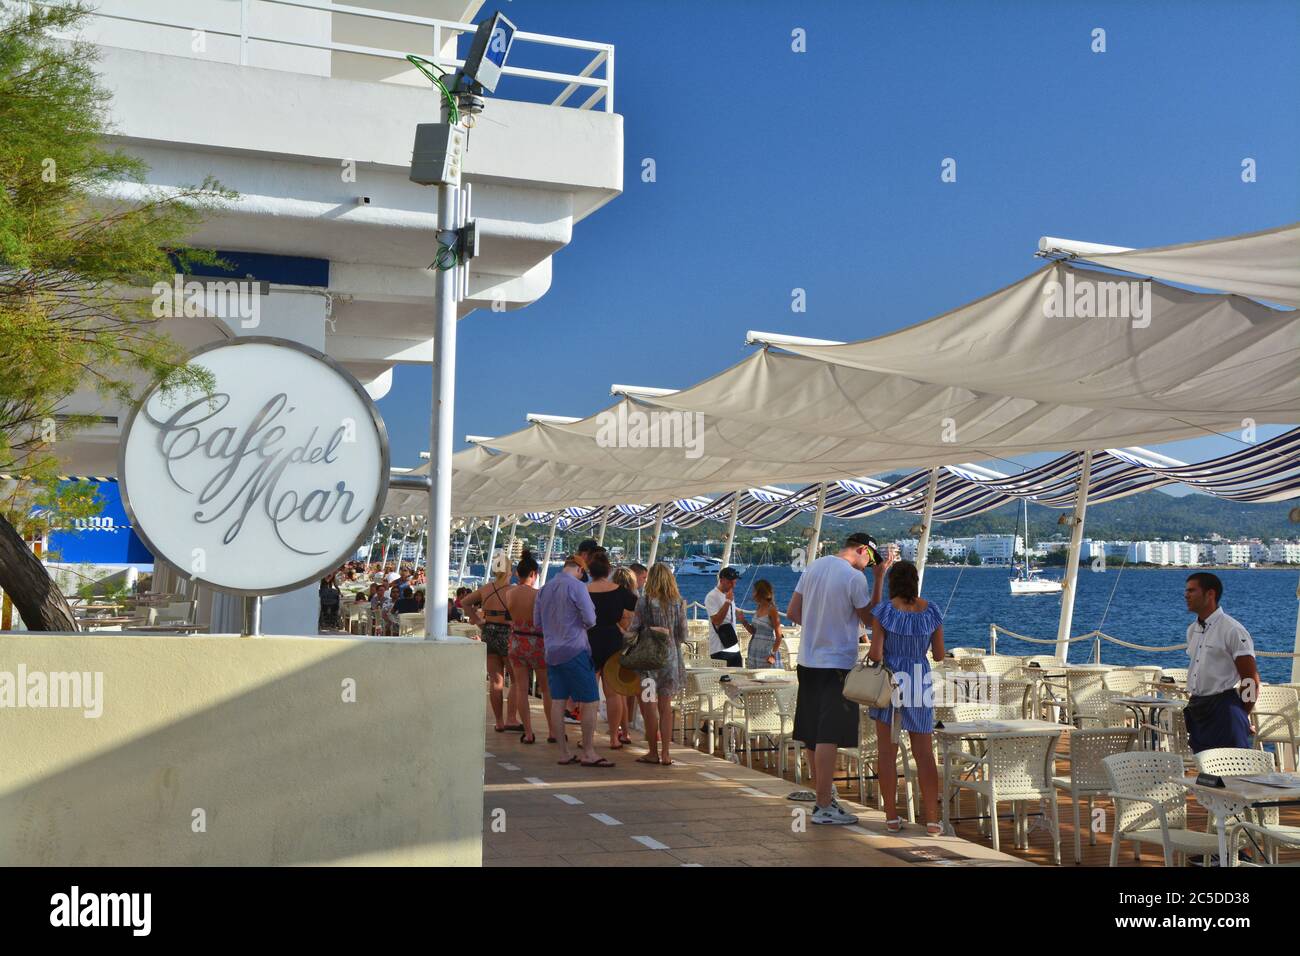 IBIZA, SPAIN - JULY 12, 2017: Cafe del Mar in San Antonio de Portmany on Ibiza island. It is a famous seaside bar with the best views of sunset with l Stock Photo